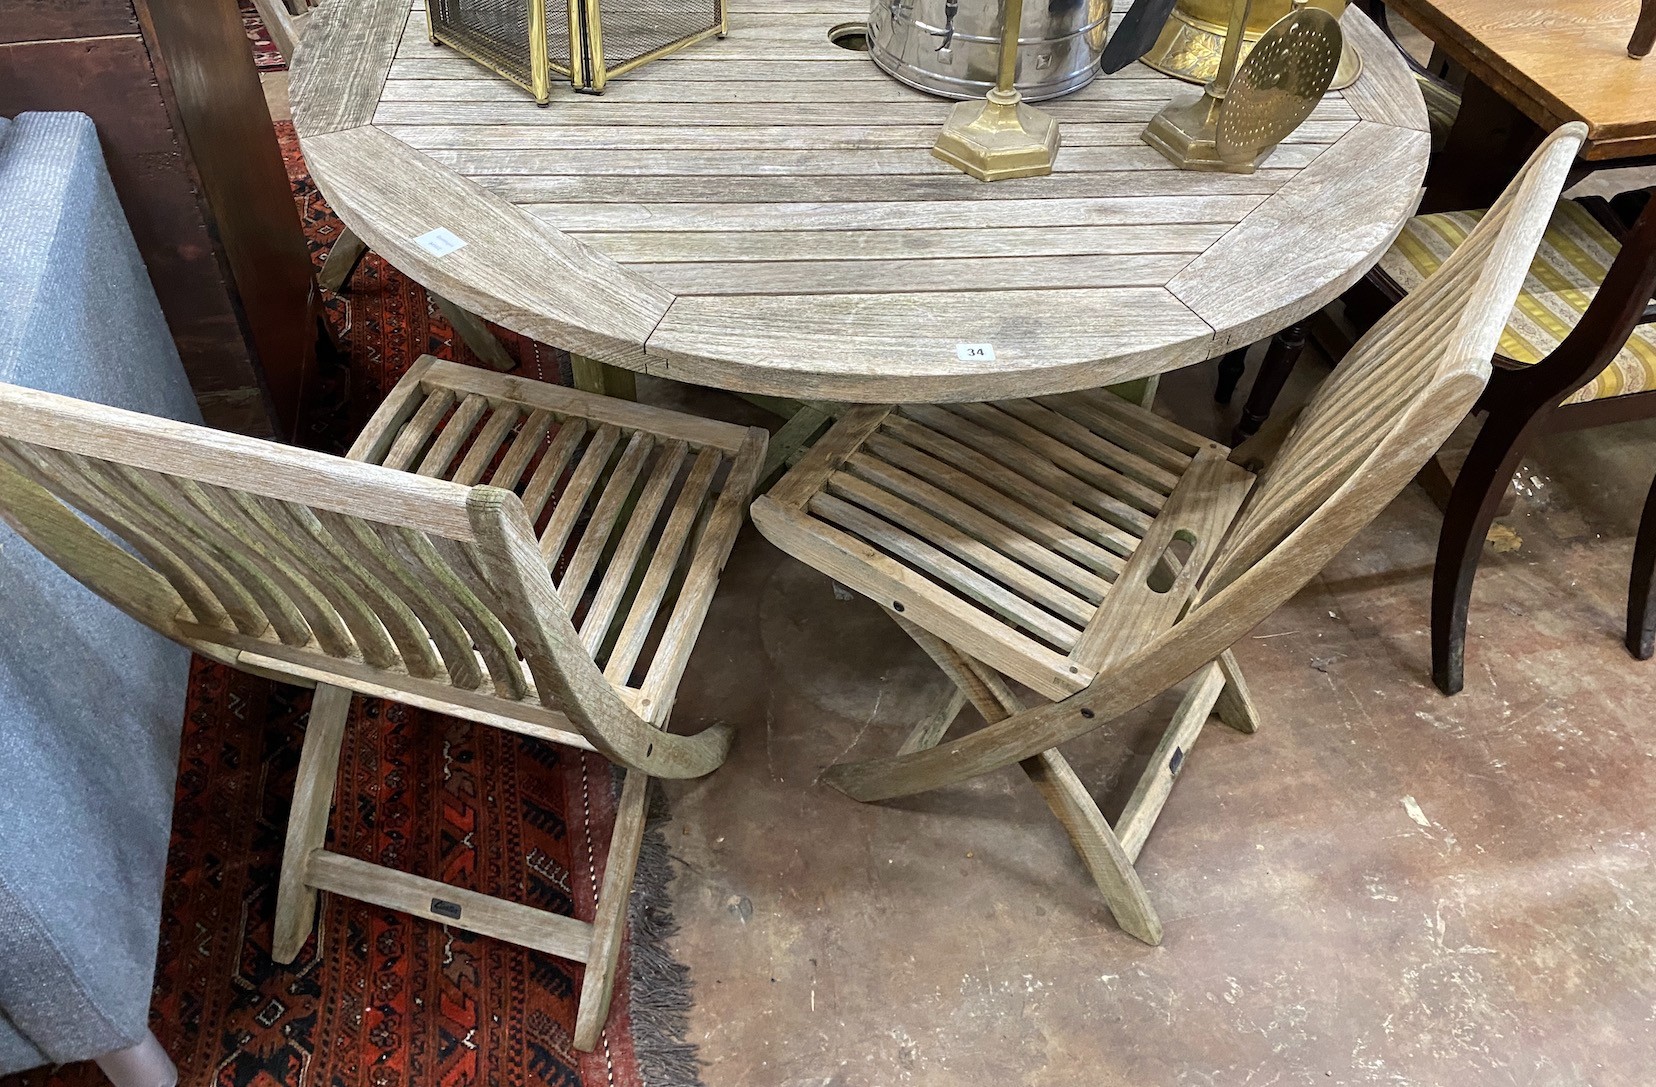 A Gloster weathered teak circular garden table, diameter 130cm, height 70cm and four folding chairs